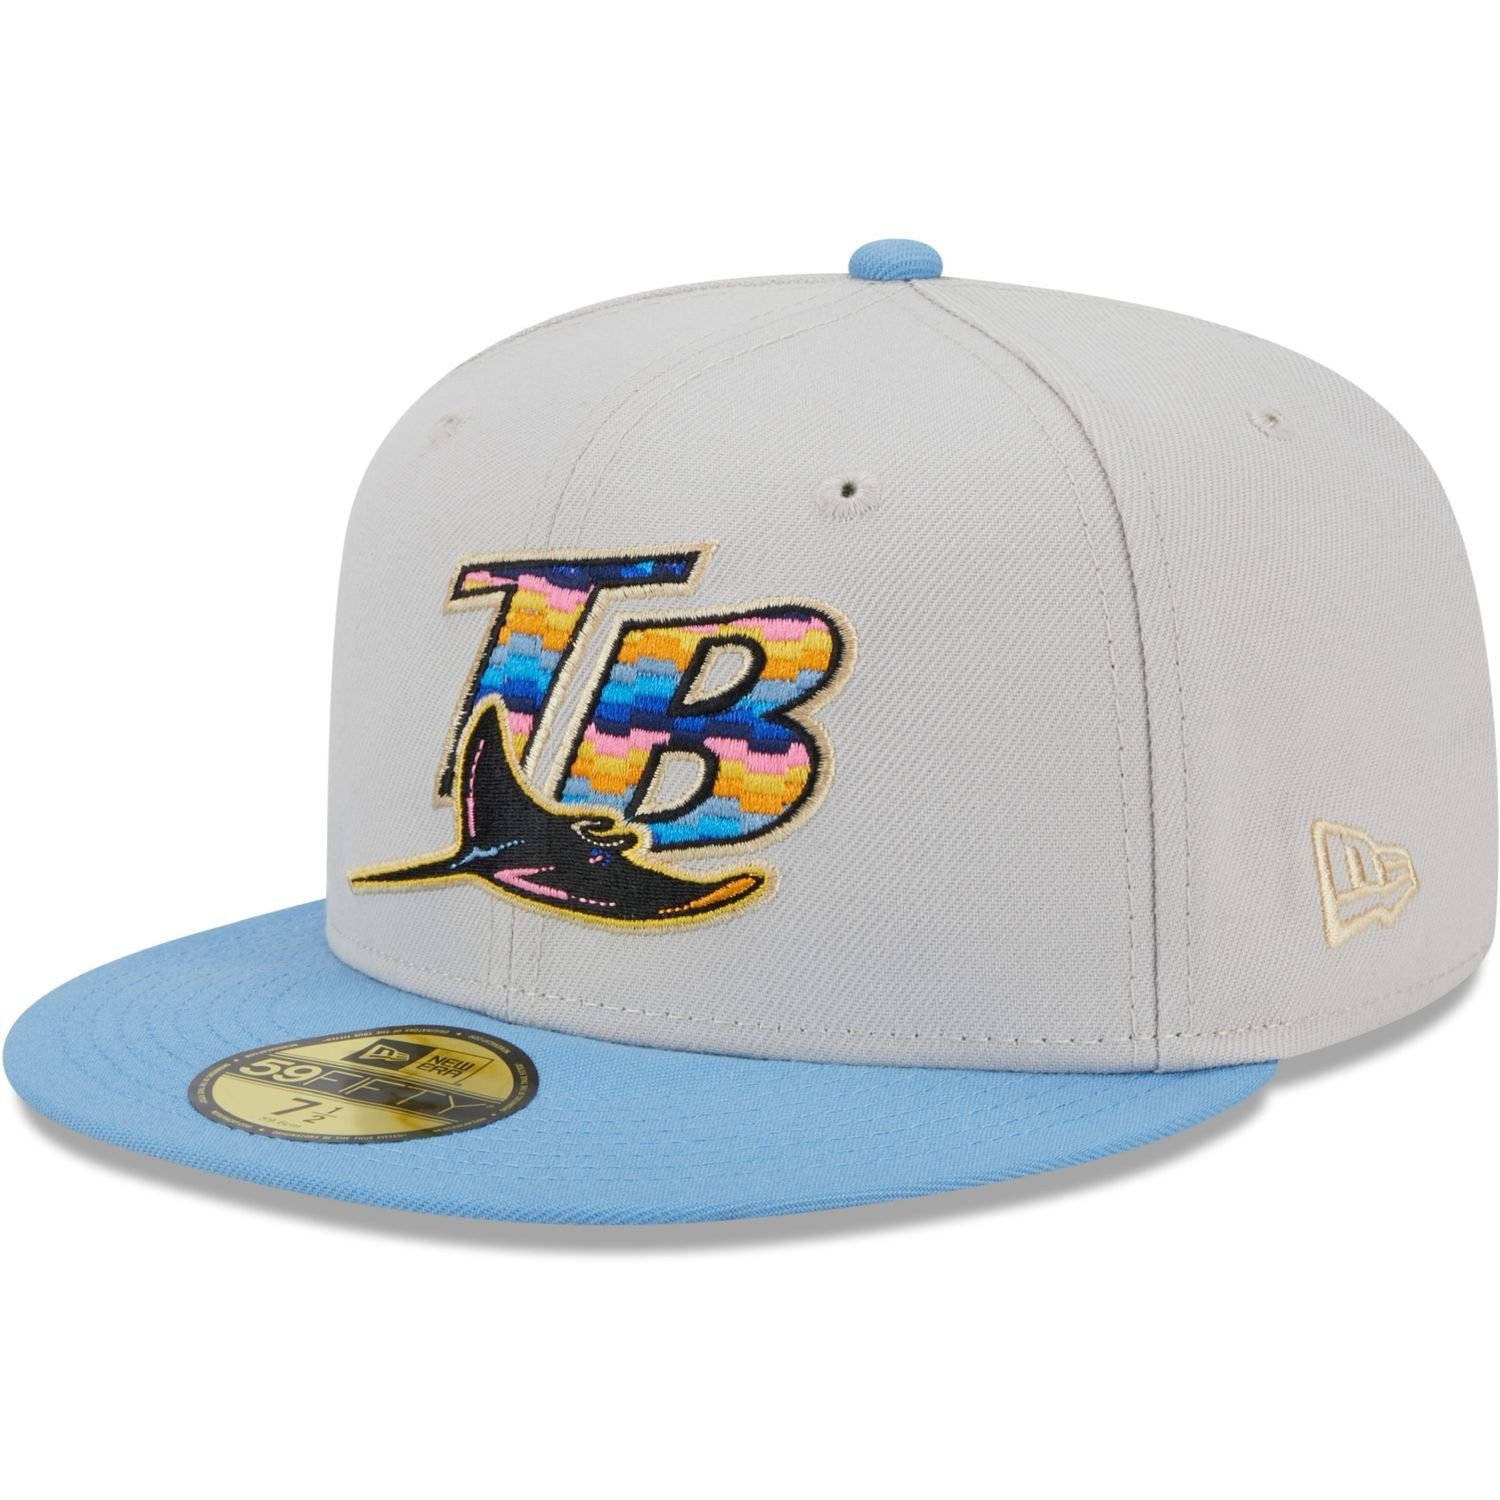 New Era Fitted Cap 59Fifty BEACHFRONT Tampa Bay Rays